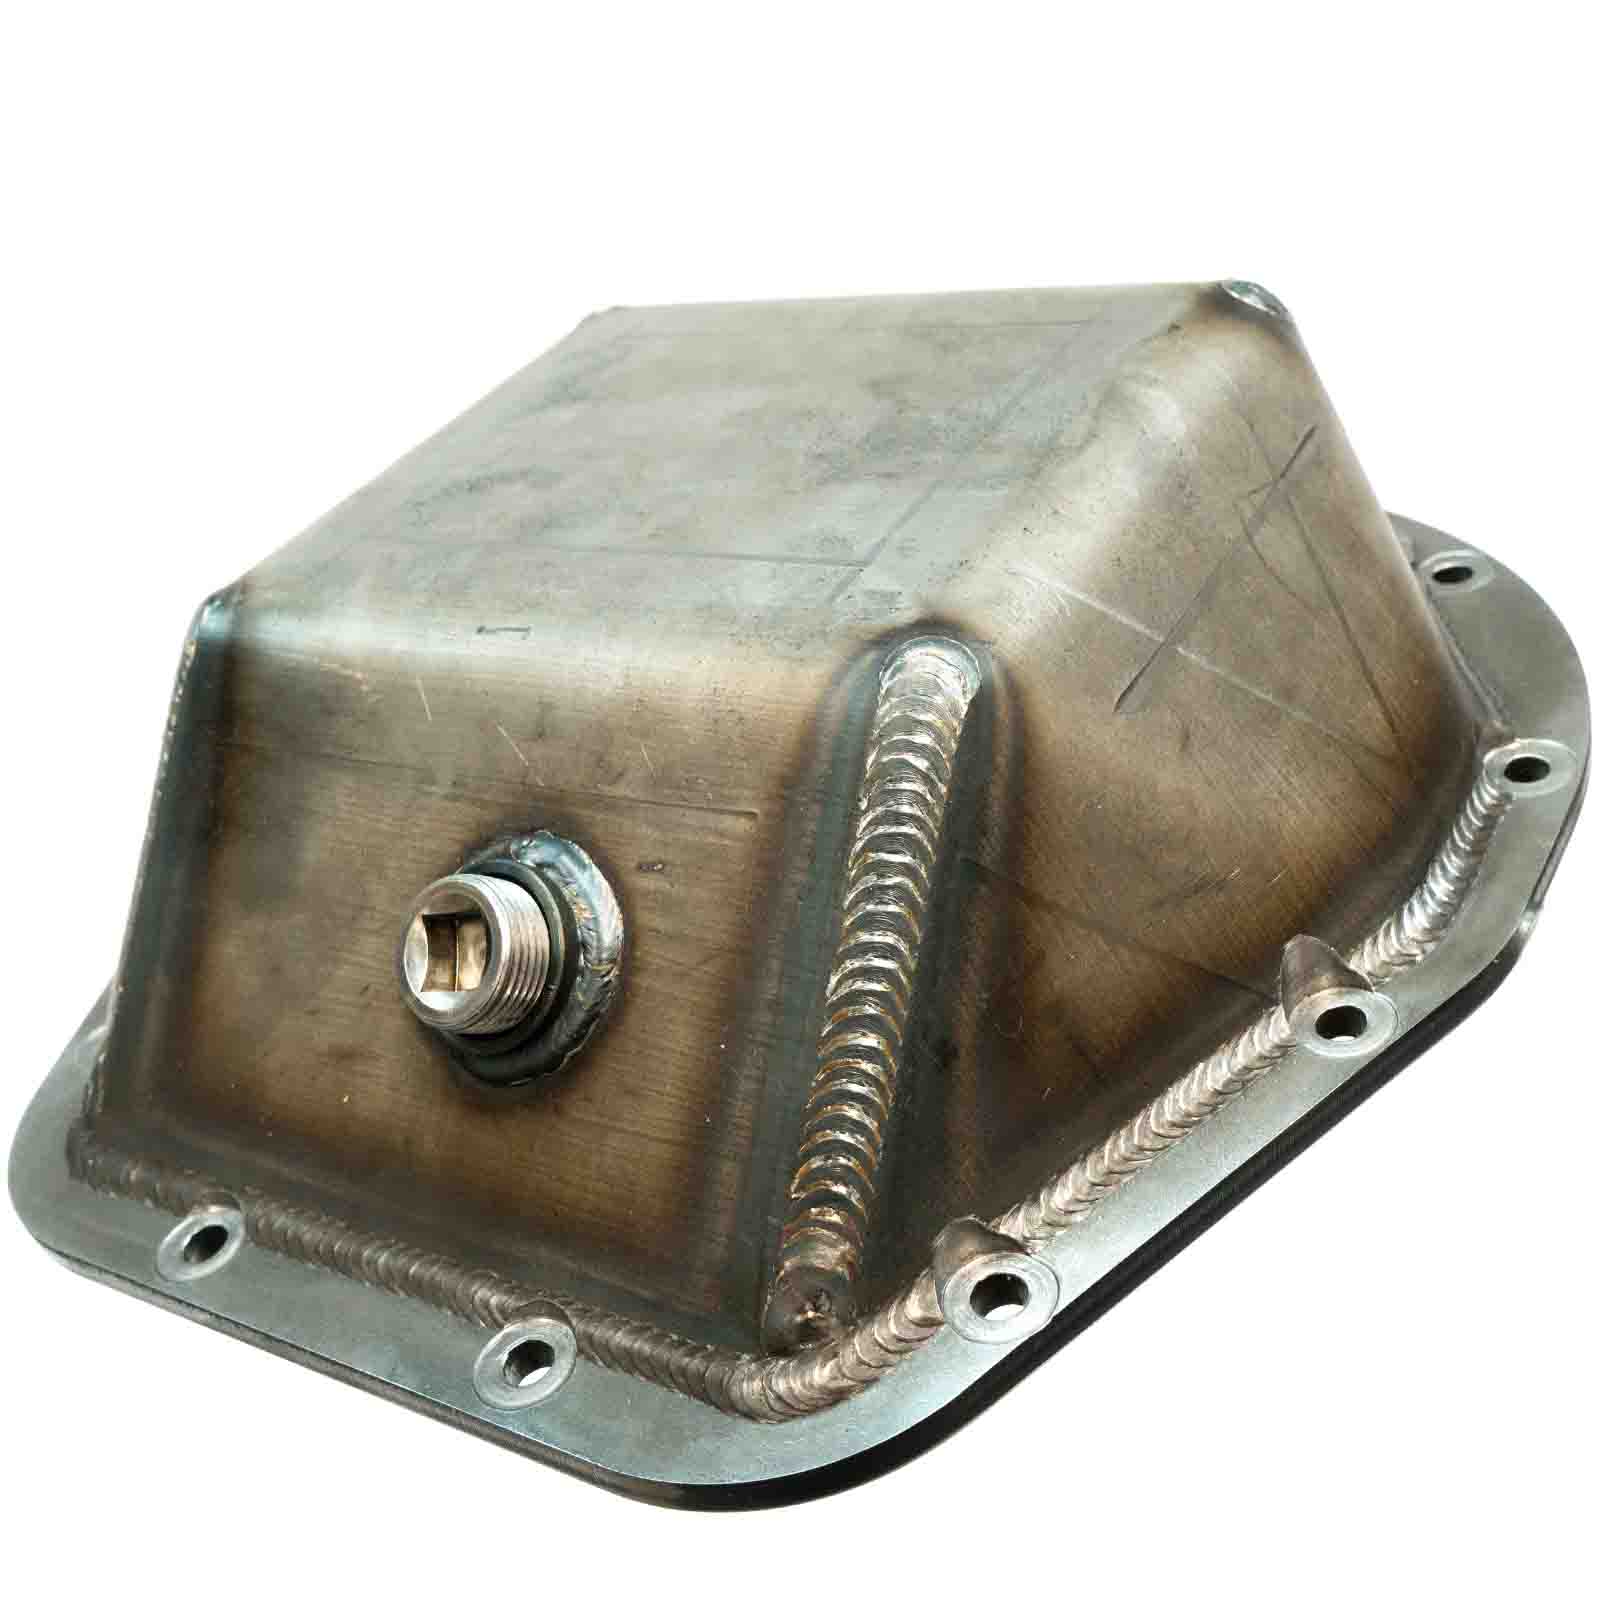 RuffStuff Specialties Heavy Duty Rear Differential Cover For Ford Sterling 10.25/10.5 Full Float Axles